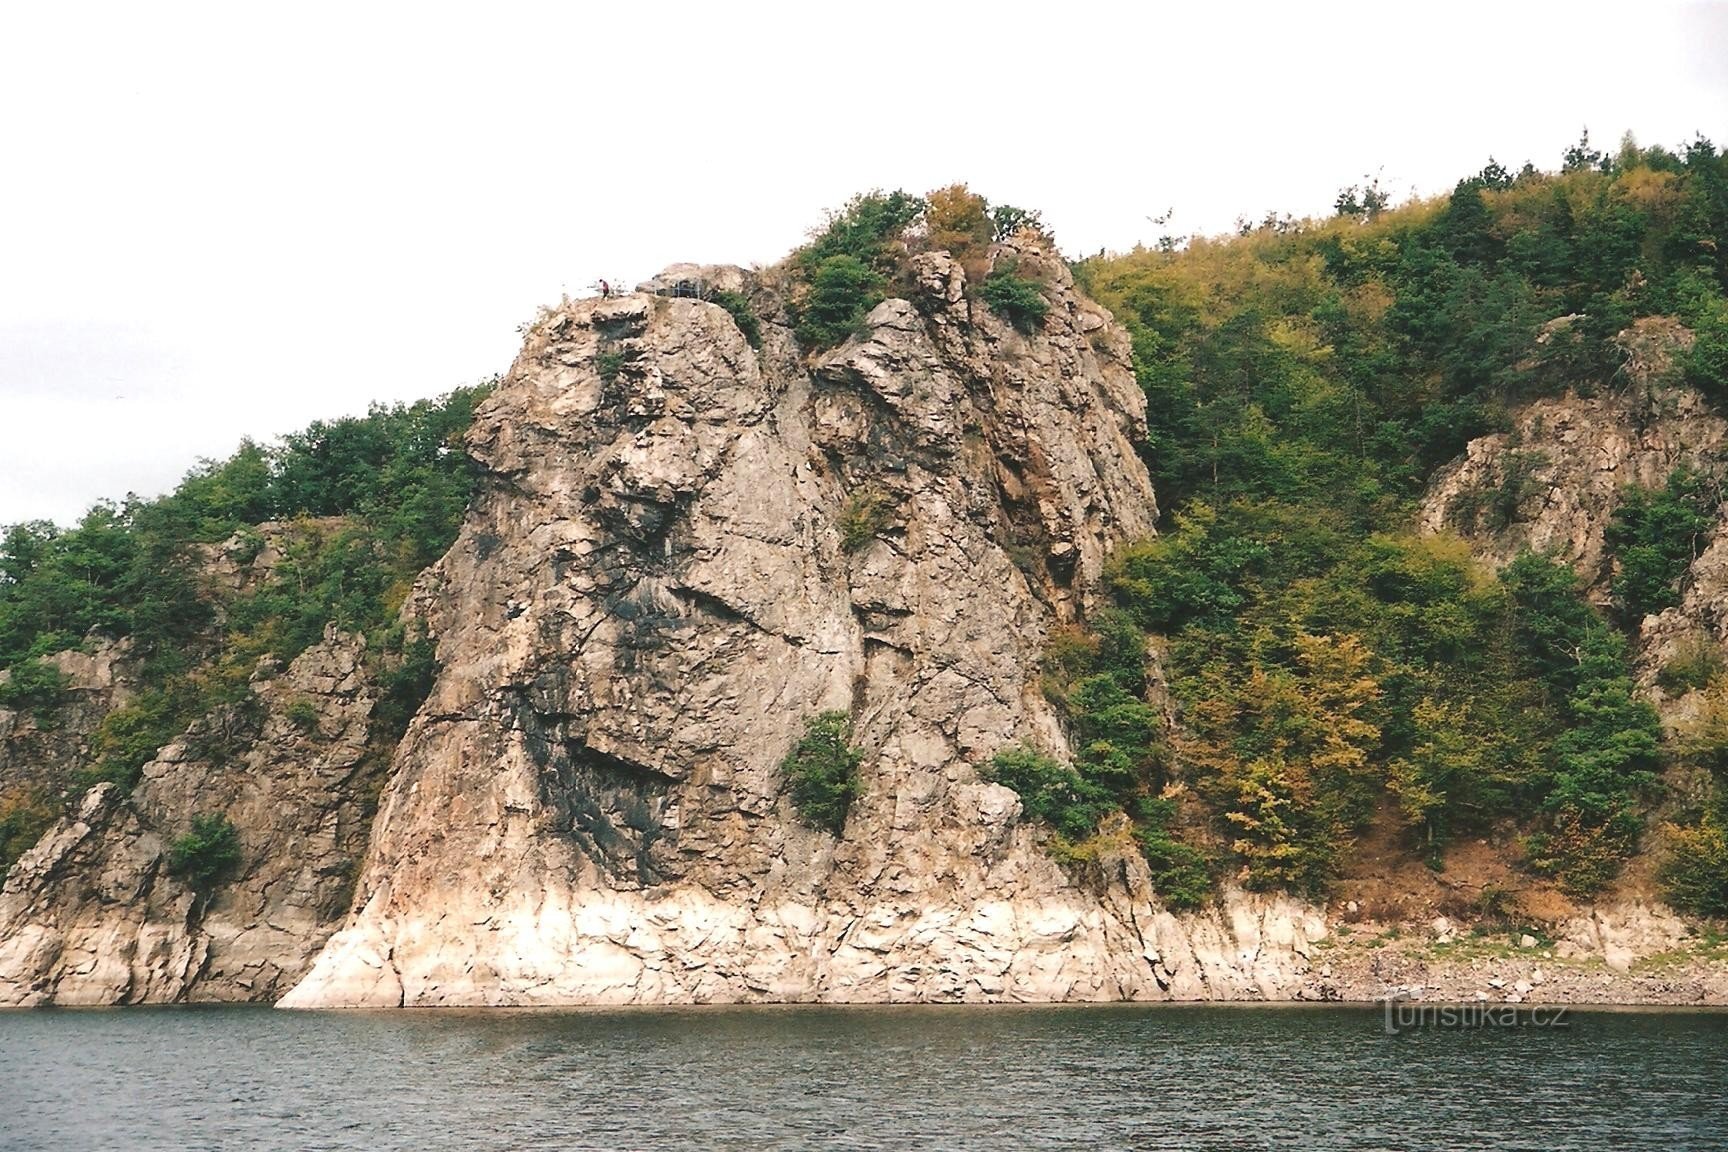 Wilson's rock from the ship